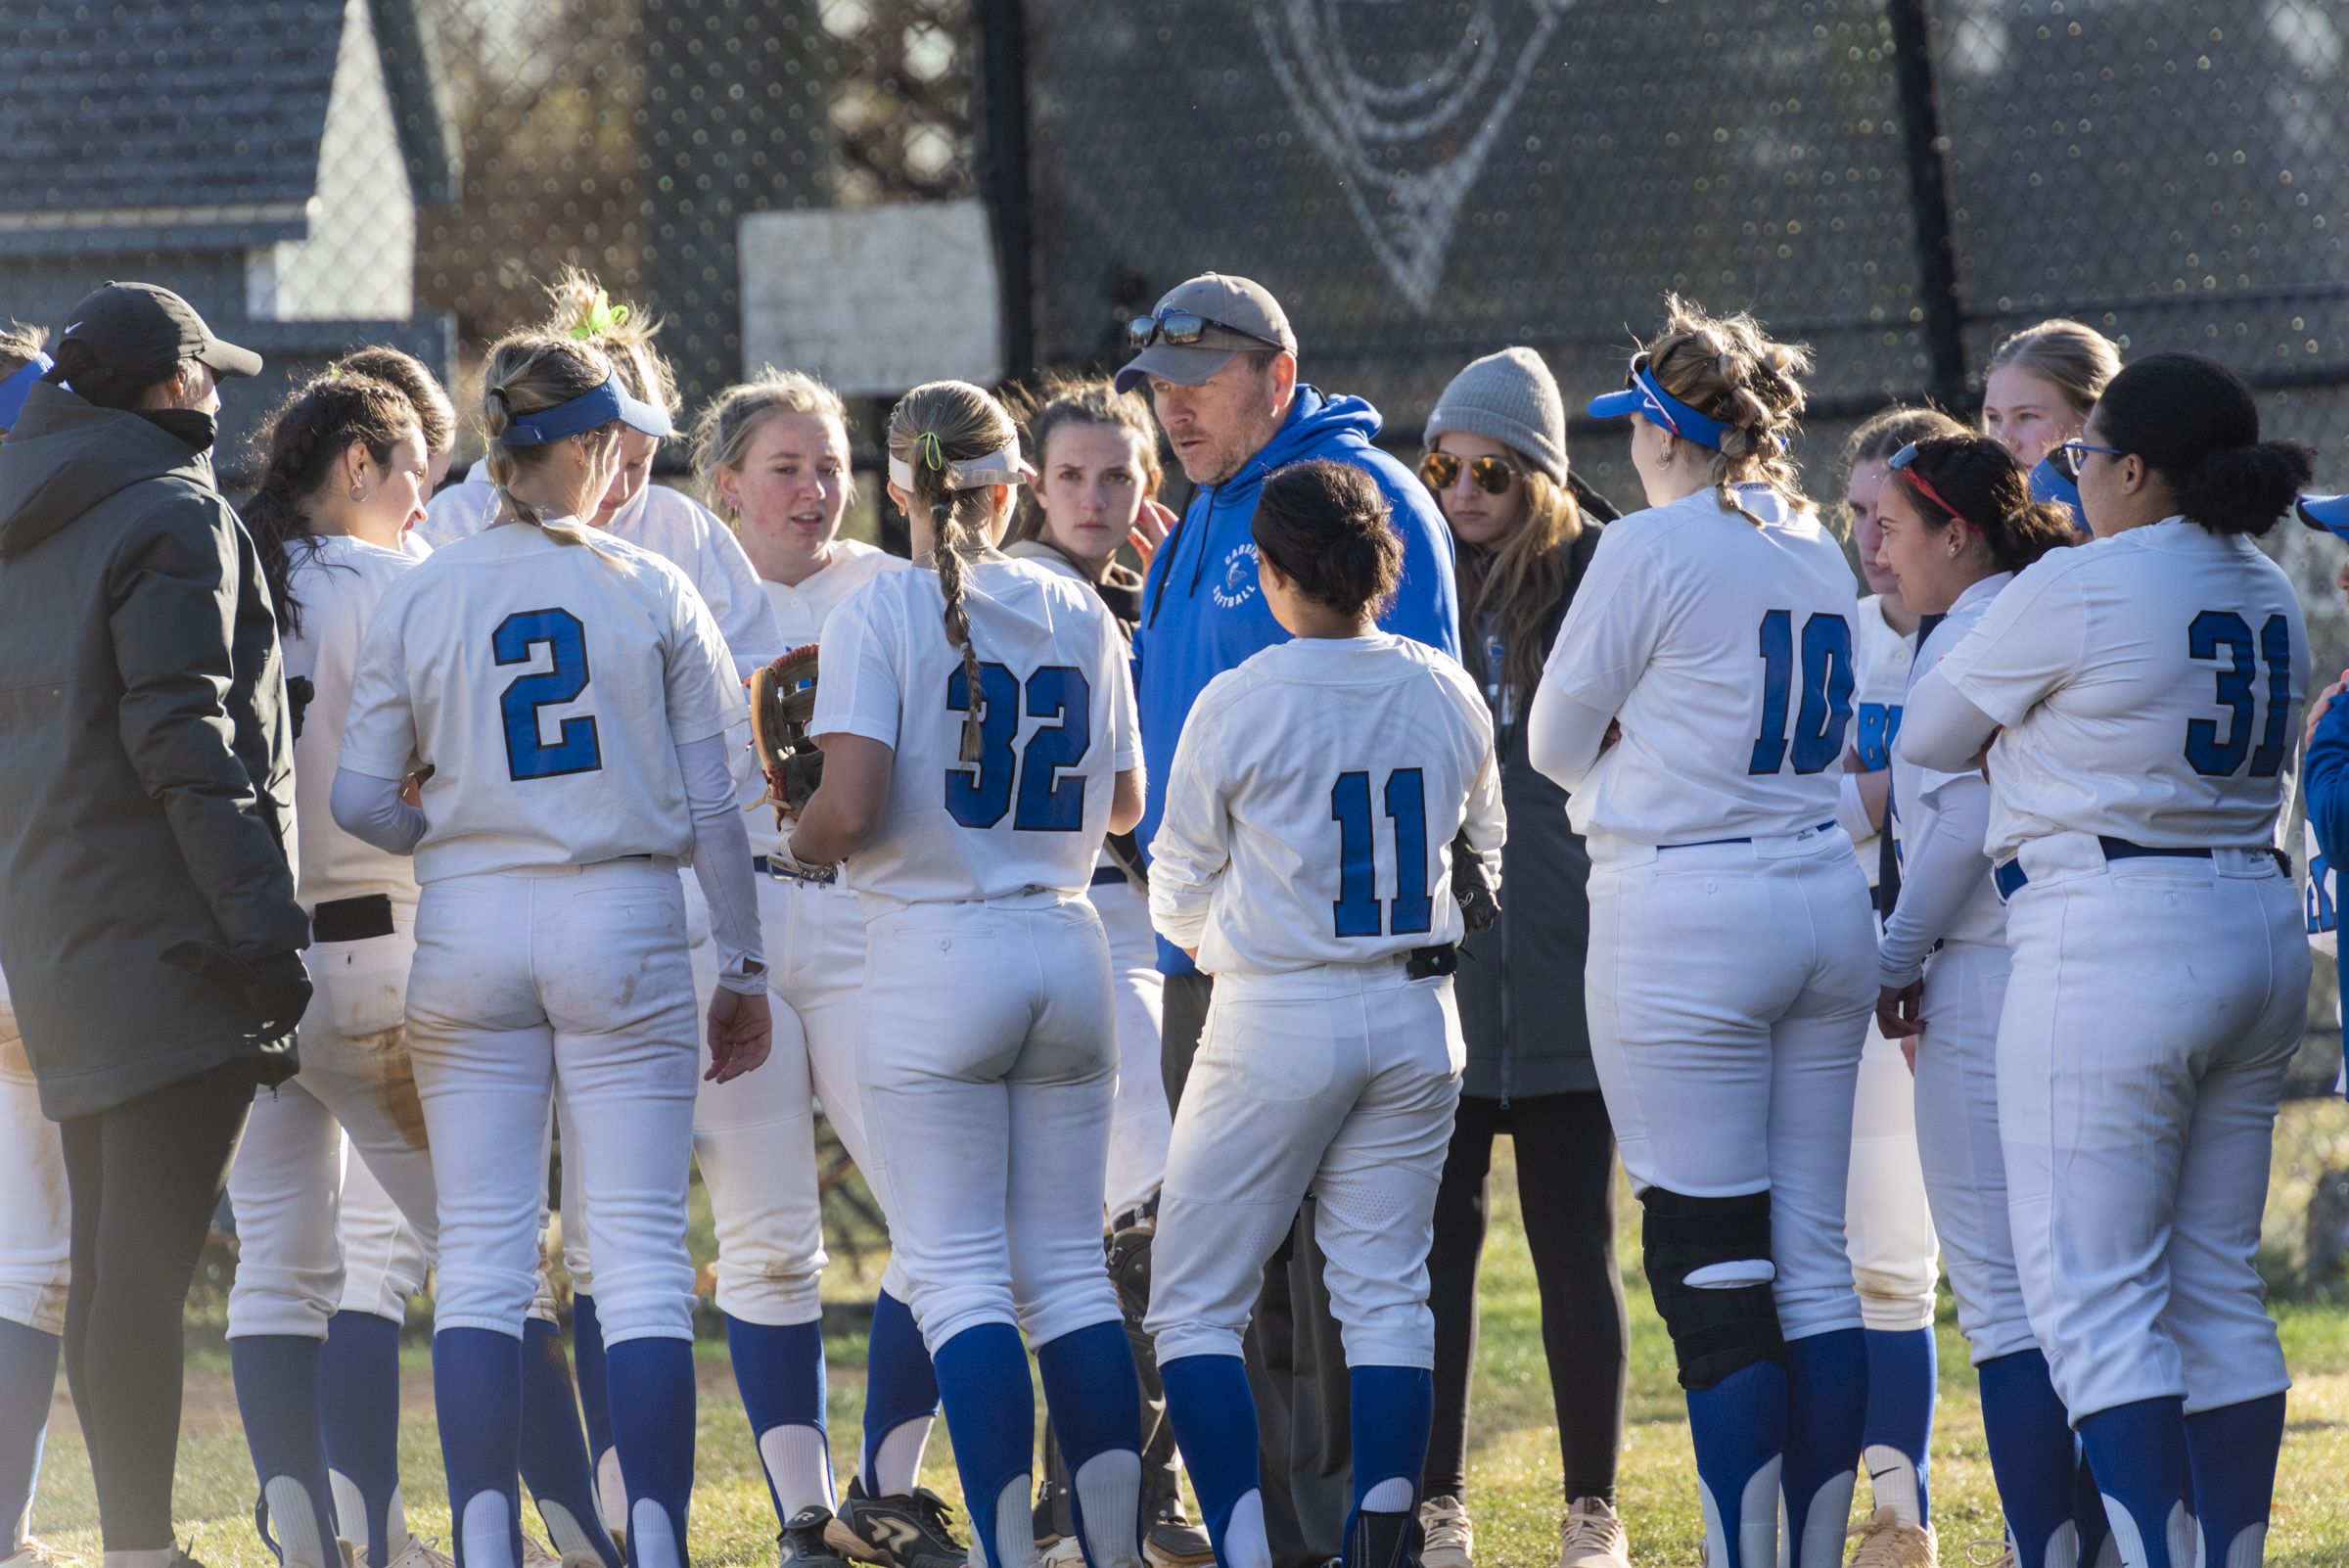 Head Coach Chris Protesto meets with his team during their home opener against Haverford. Protesto has been on the Cavaliers coaching staff since 2019 and helped the team win the 2022 Atlantic East Championship, their first since 2004. Photo by Linda Johnson from Cabrini Athletics.